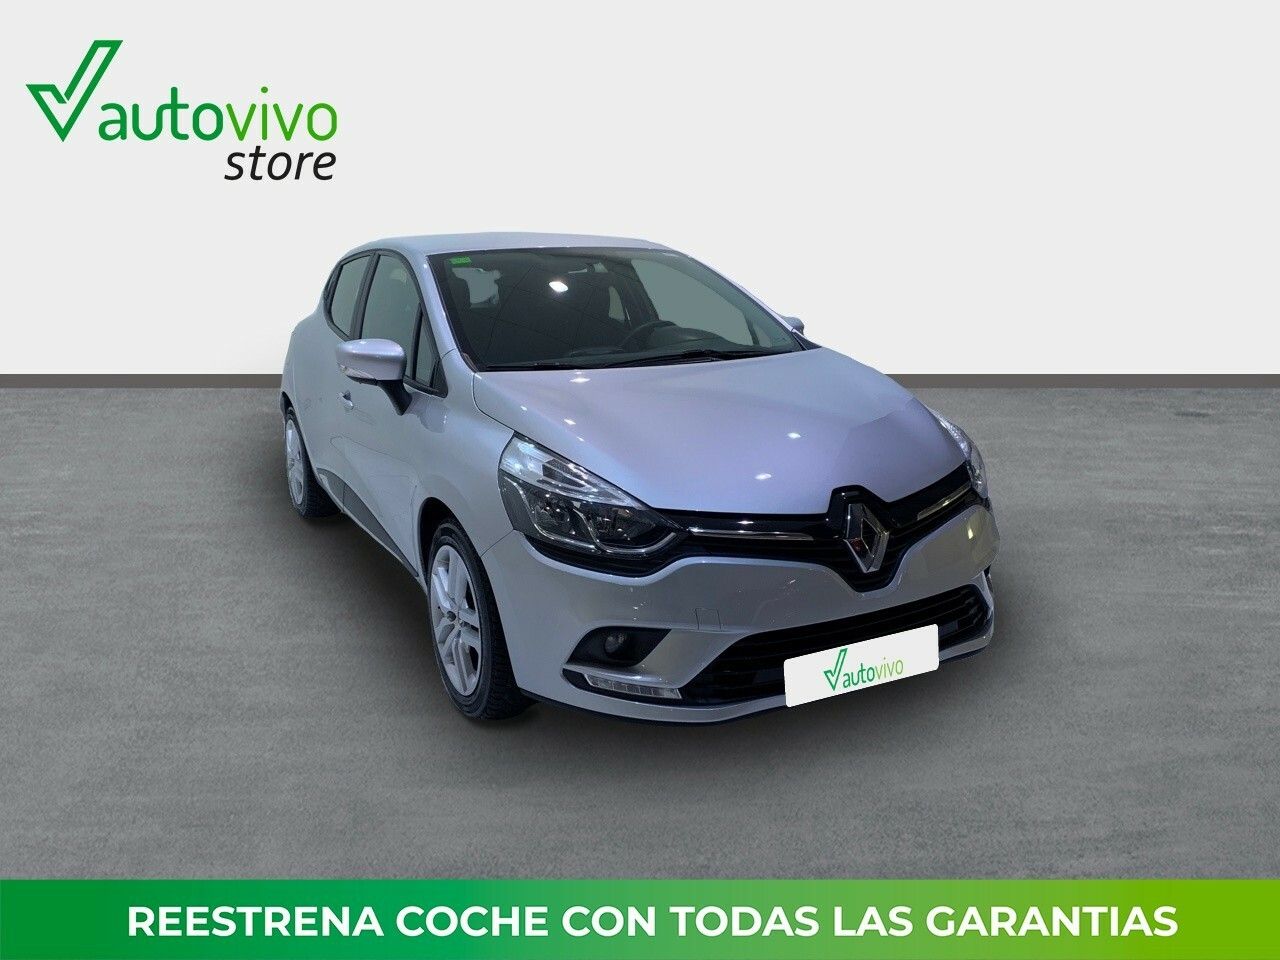 Renault Clio LIMITED 0.9 TCE 90 CV 5P  - Foto 1